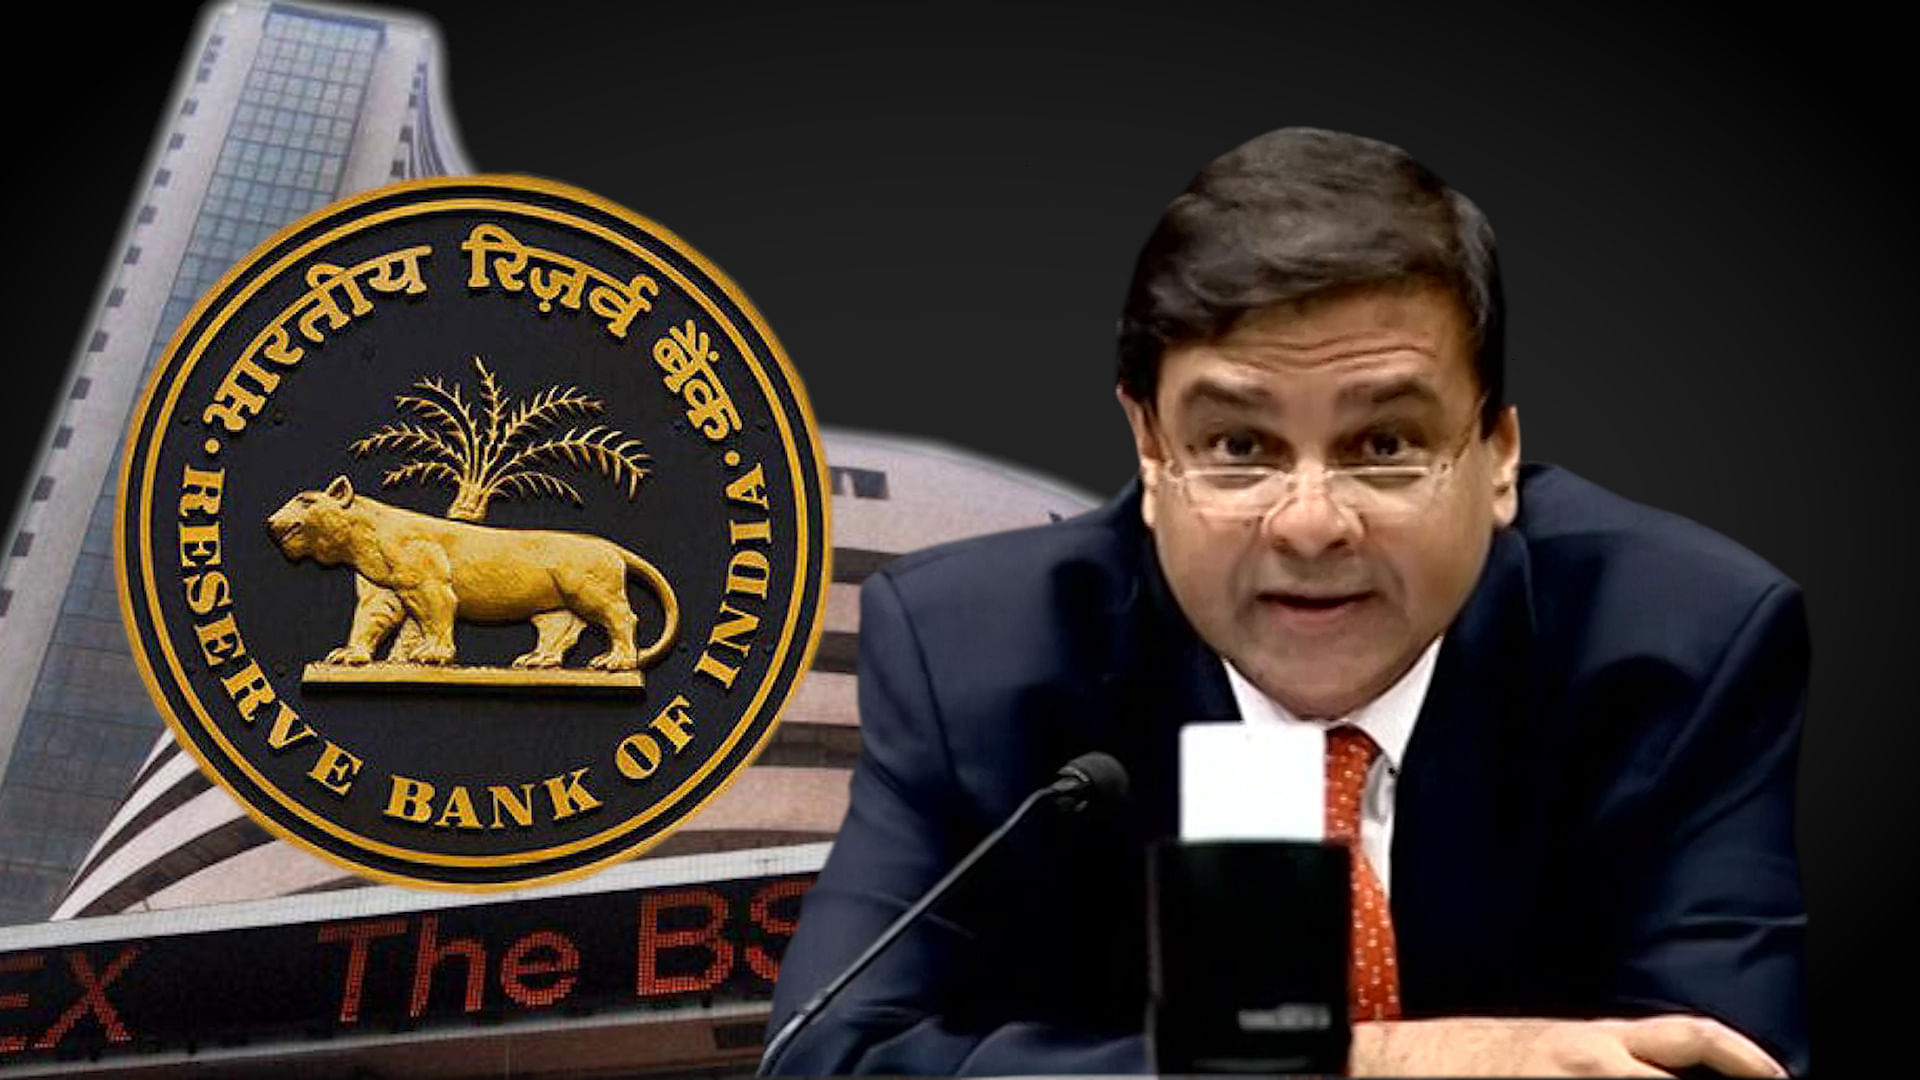 Reserve Bank of India Governor Urjit Patel and his team have now come out at least four times to defend their policies through public speeches.